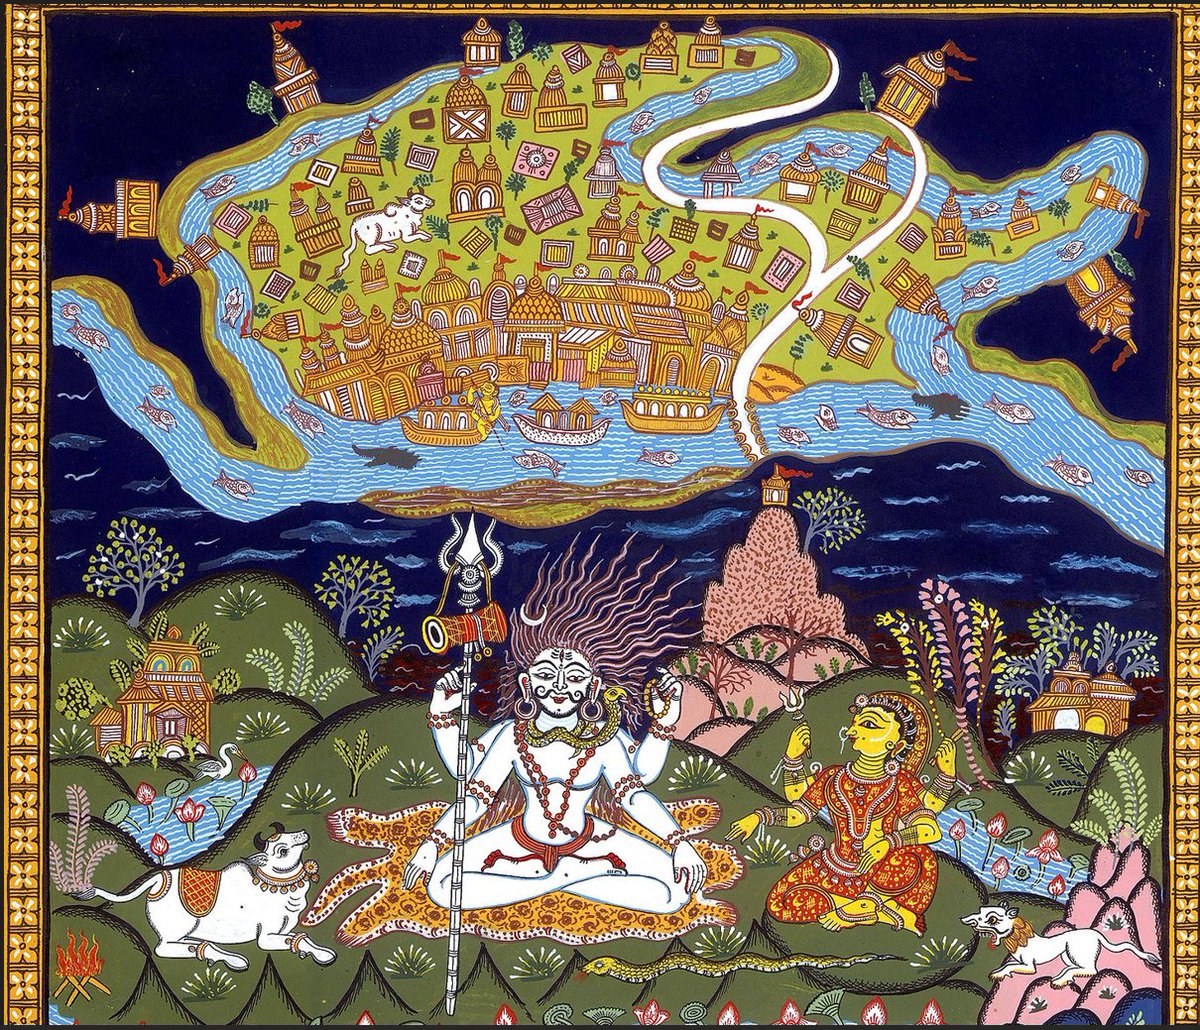 Here is an old Hindu map of Varanasi. Varanasi is depicted as standing on the trident of Shiva. At the center of Varanasi is Gyanvapi. Such is the importance of Gyanvapi in Hindu civilization.